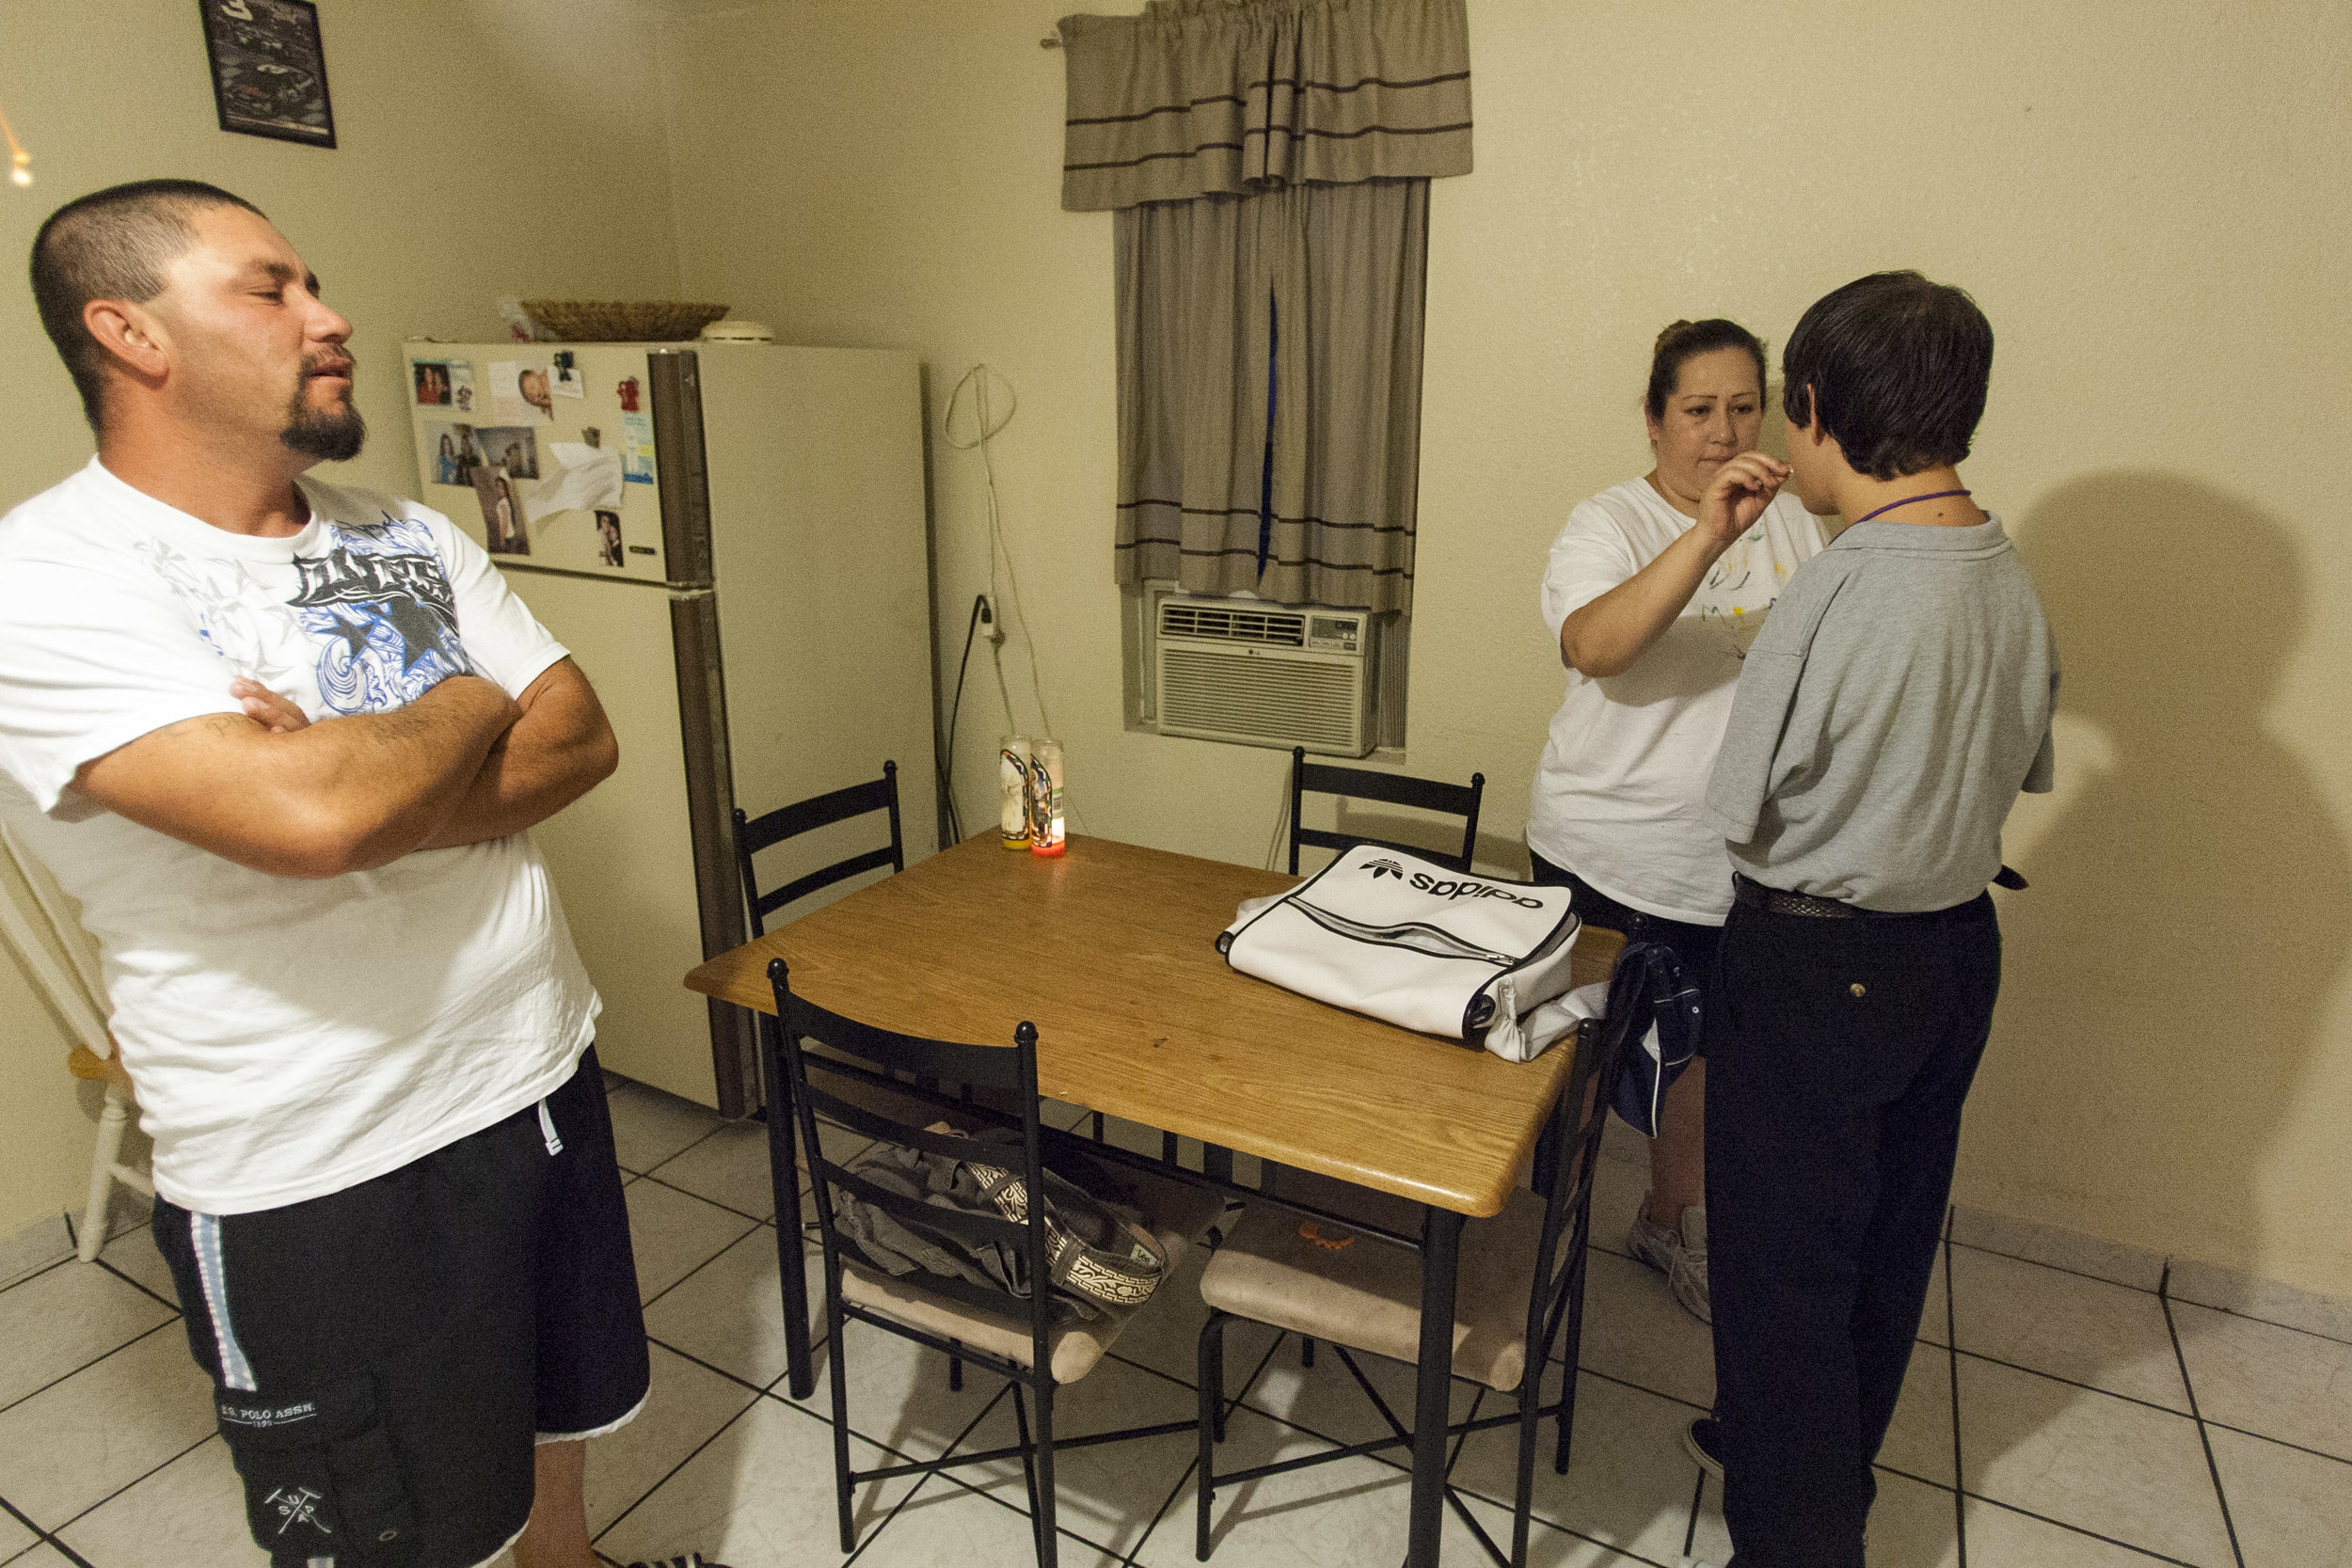  Jesse Flores readies for the school day Friday, May 28, 2010, at home in Odessa, Texas. His parents, Yari and Francisco Flores, help when needed. They were surprised by Flores' missing limbs when he was born as they had not scheduled an ultrasound d